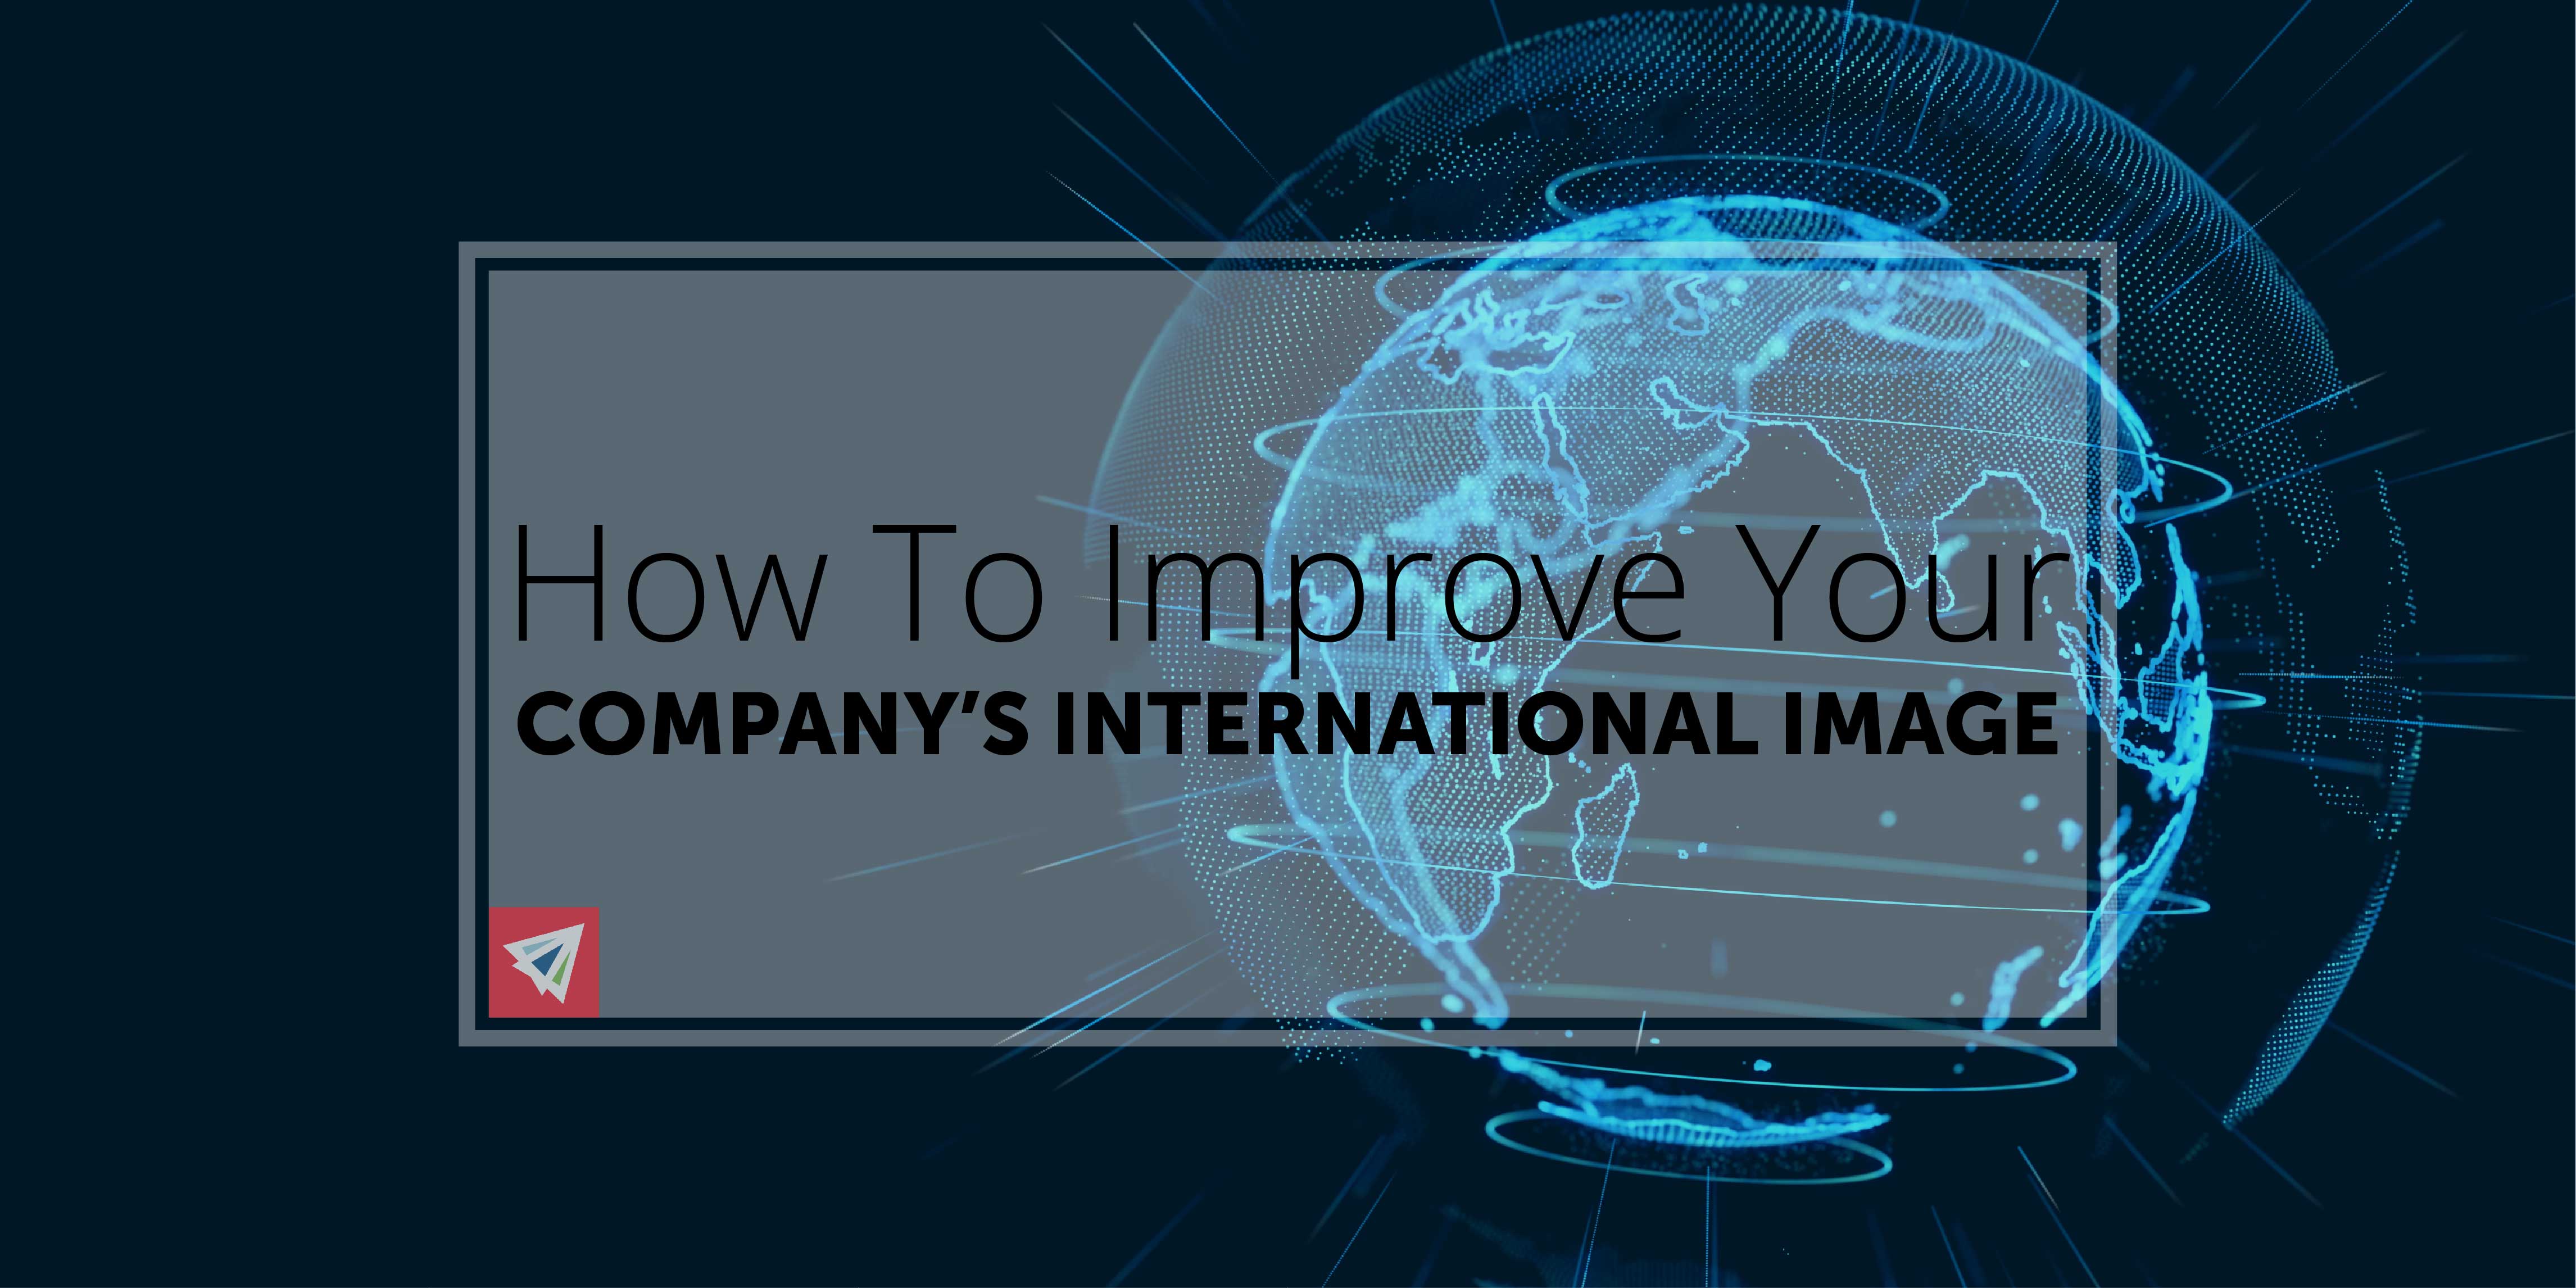 How To Improve Your Company’s International Image